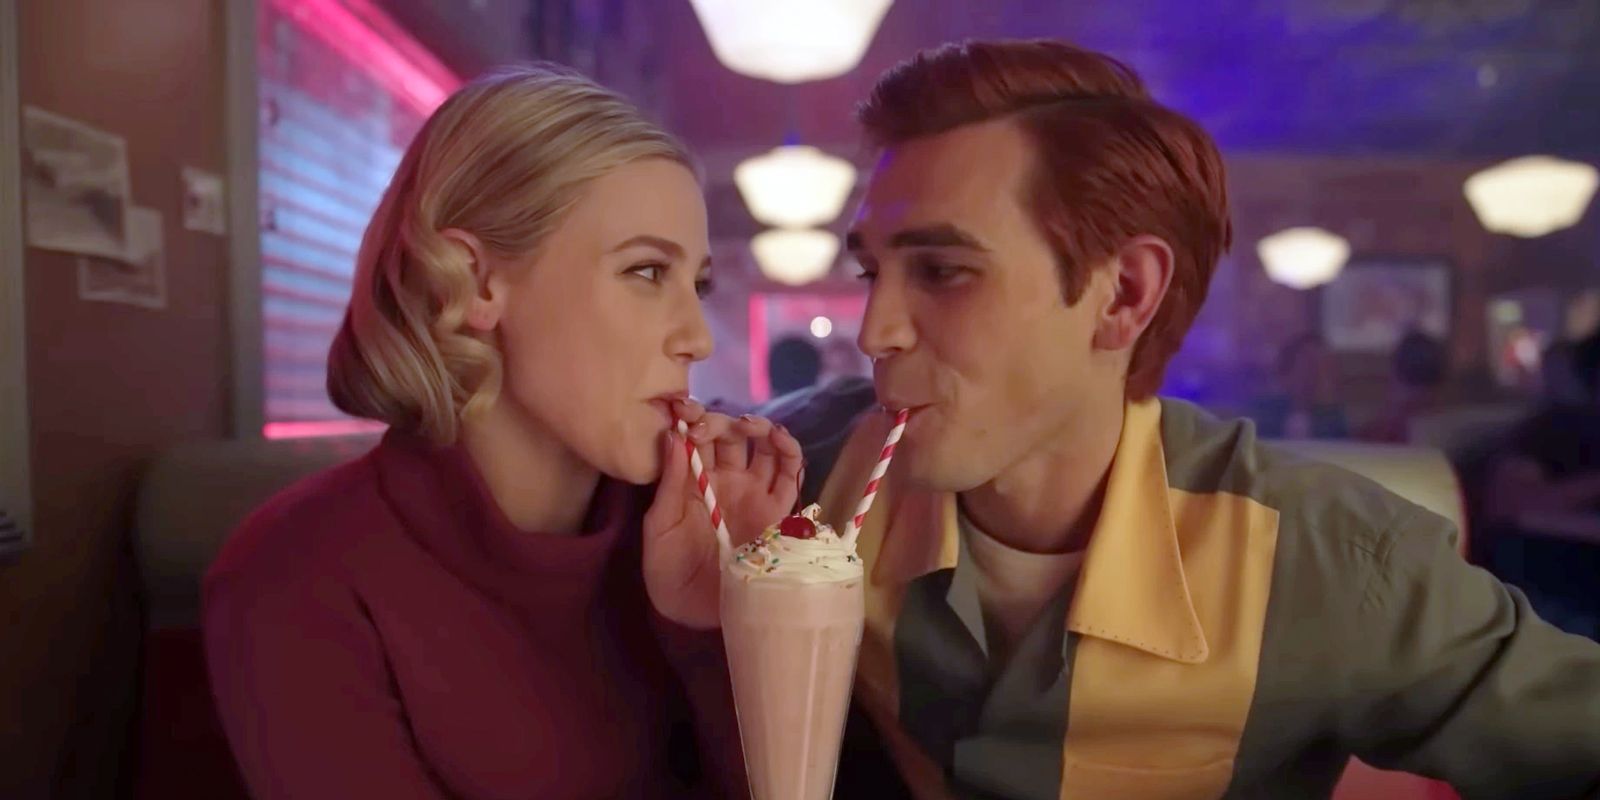 Archie and Betty share a milkshake together at Pop's in Riverdale